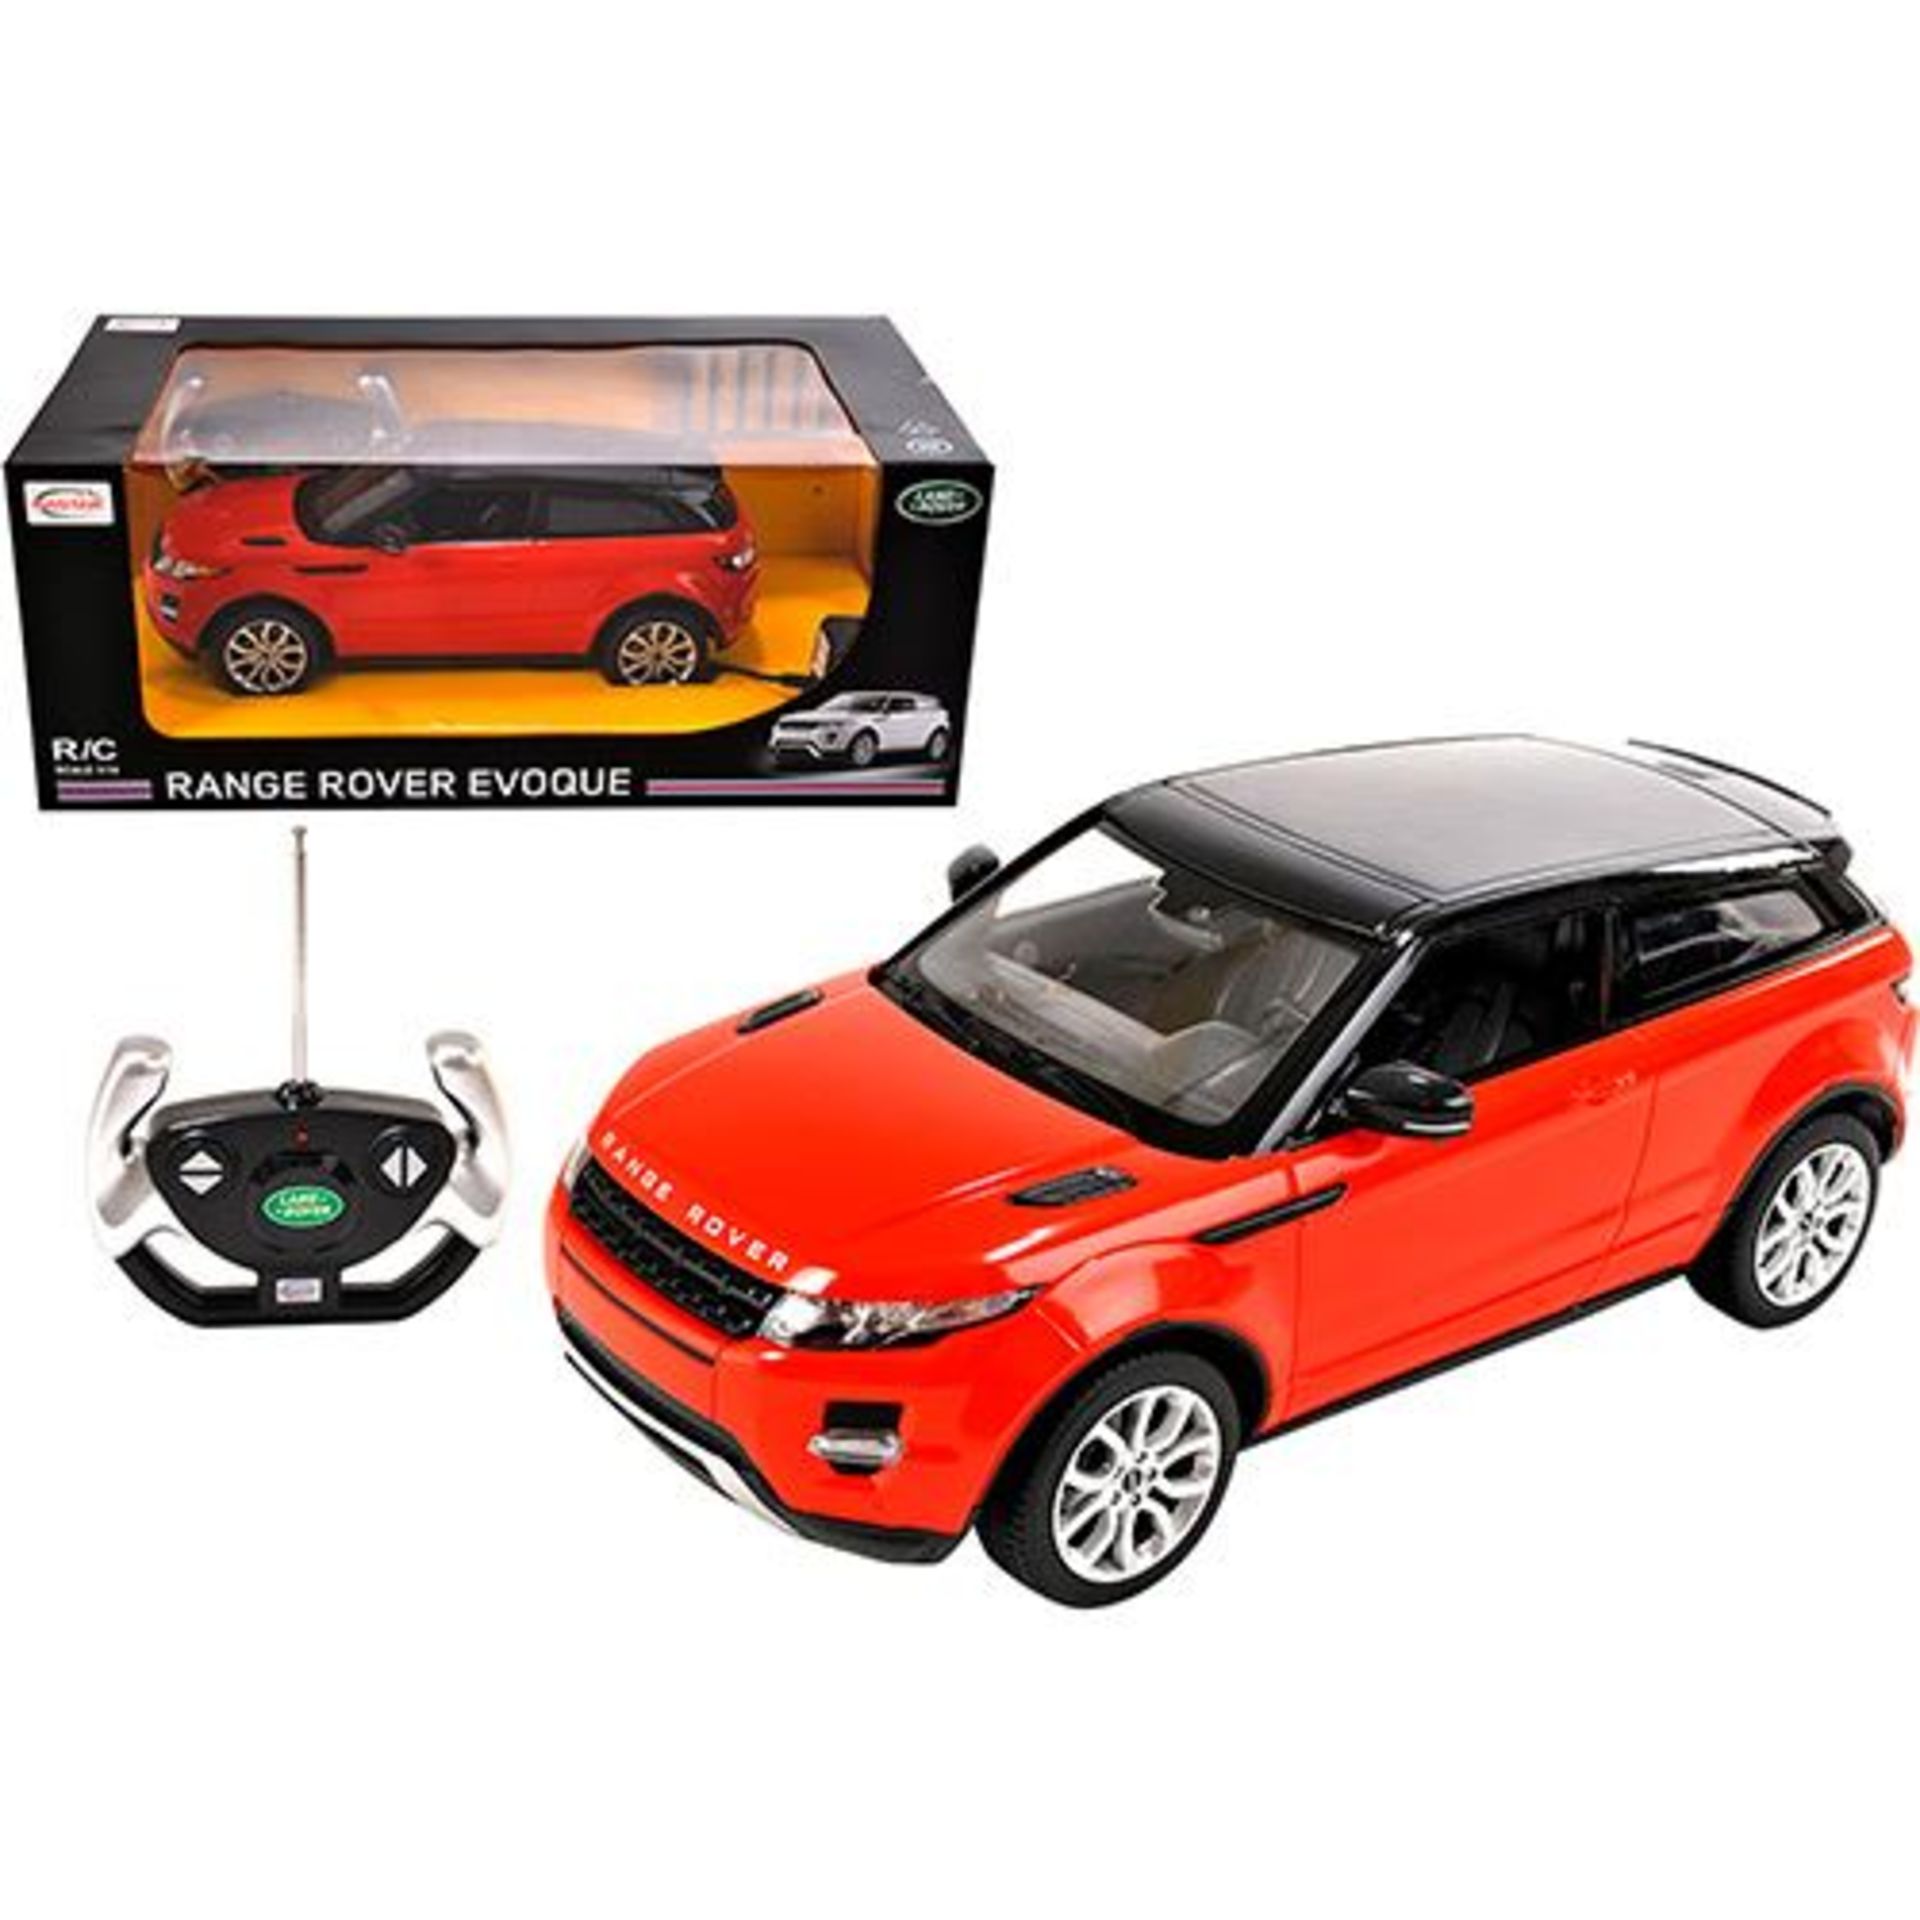 V Brand New 1:14 Scale R/C Range Rover Evoque SRP49.99 Various Colours - Image 2 of 2